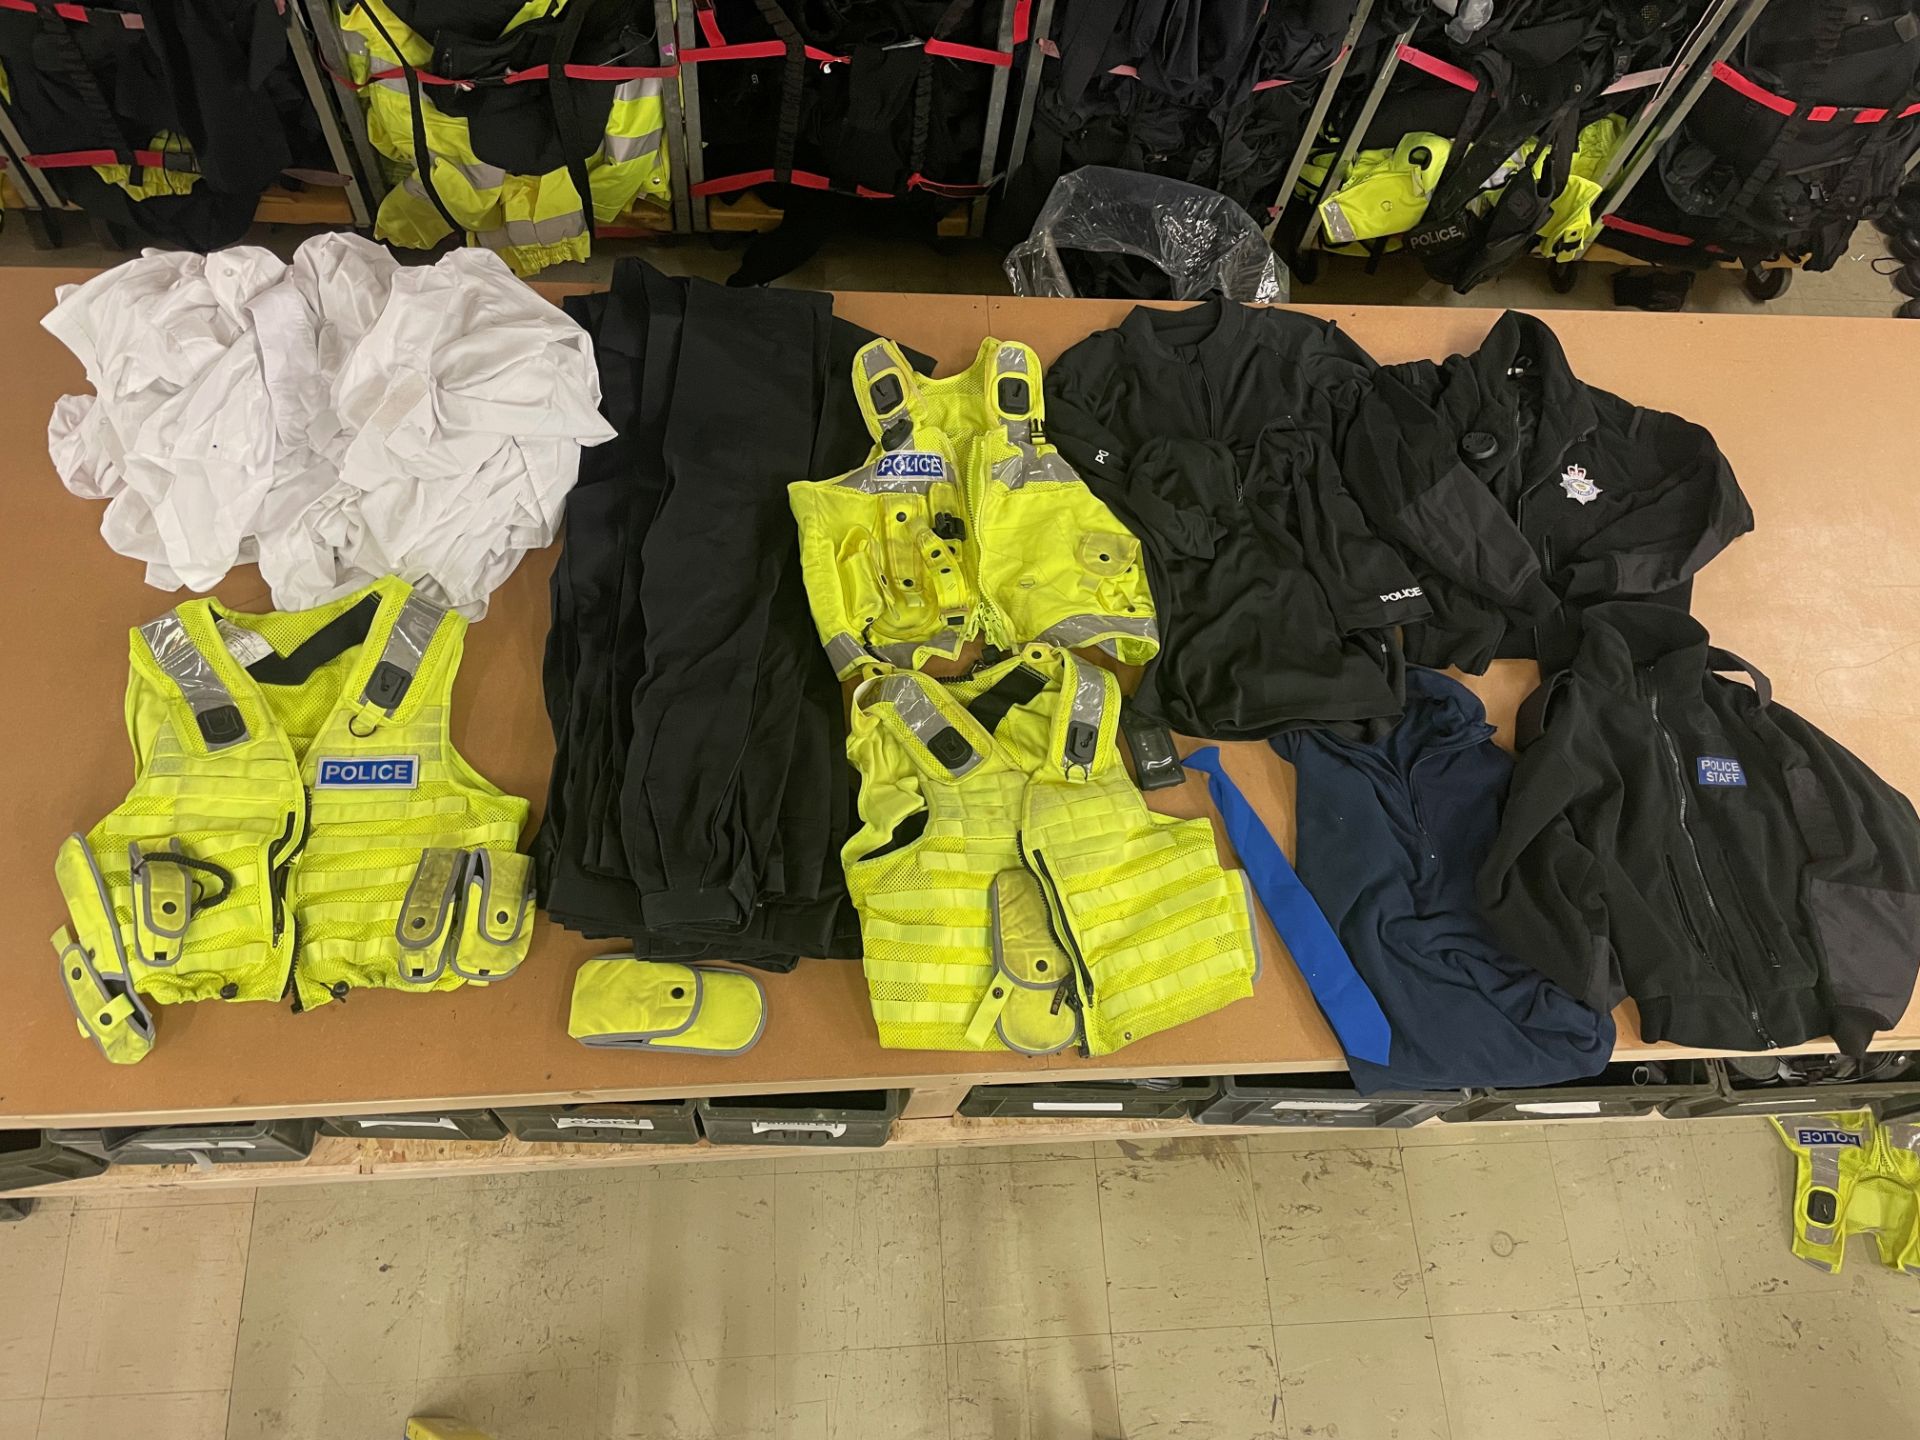 20 X BAGS EX POLICE CLOTHING & ACCESSORIES - RRP £5500.00 - Image 4 of 12